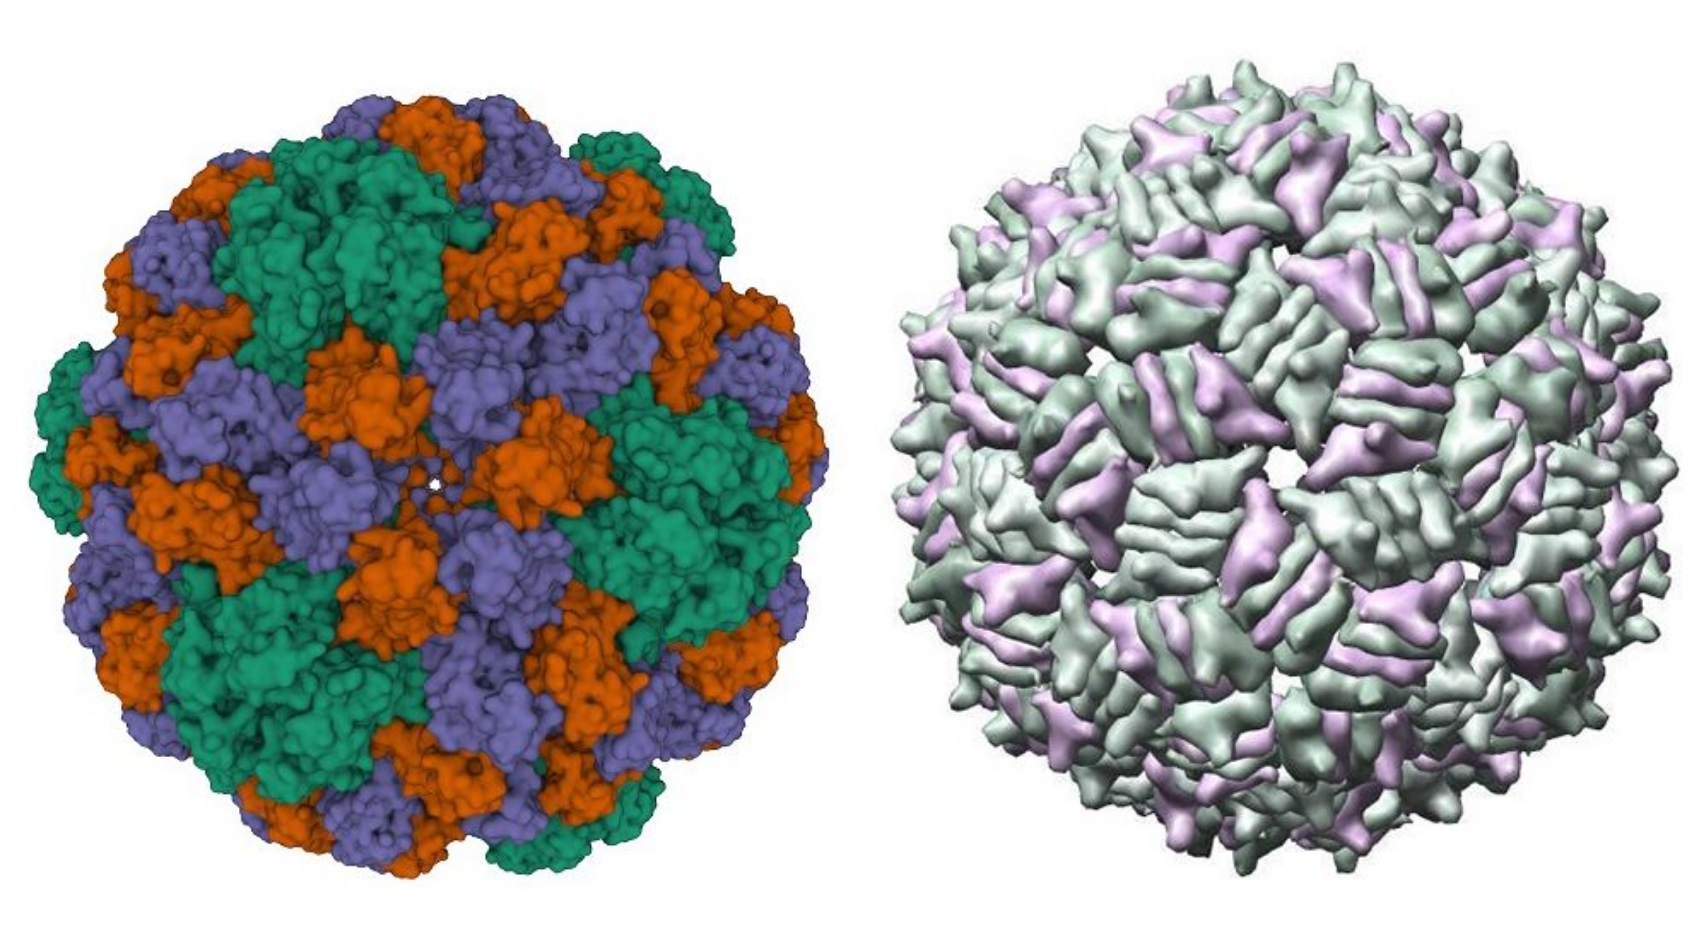 Multiple protein subunits (green, purple and red) of a plant-infecting virus have separate nucleation and growth phases similar to the MS2 bacteria-infecting virus (right). Source: Protein Data Bank.